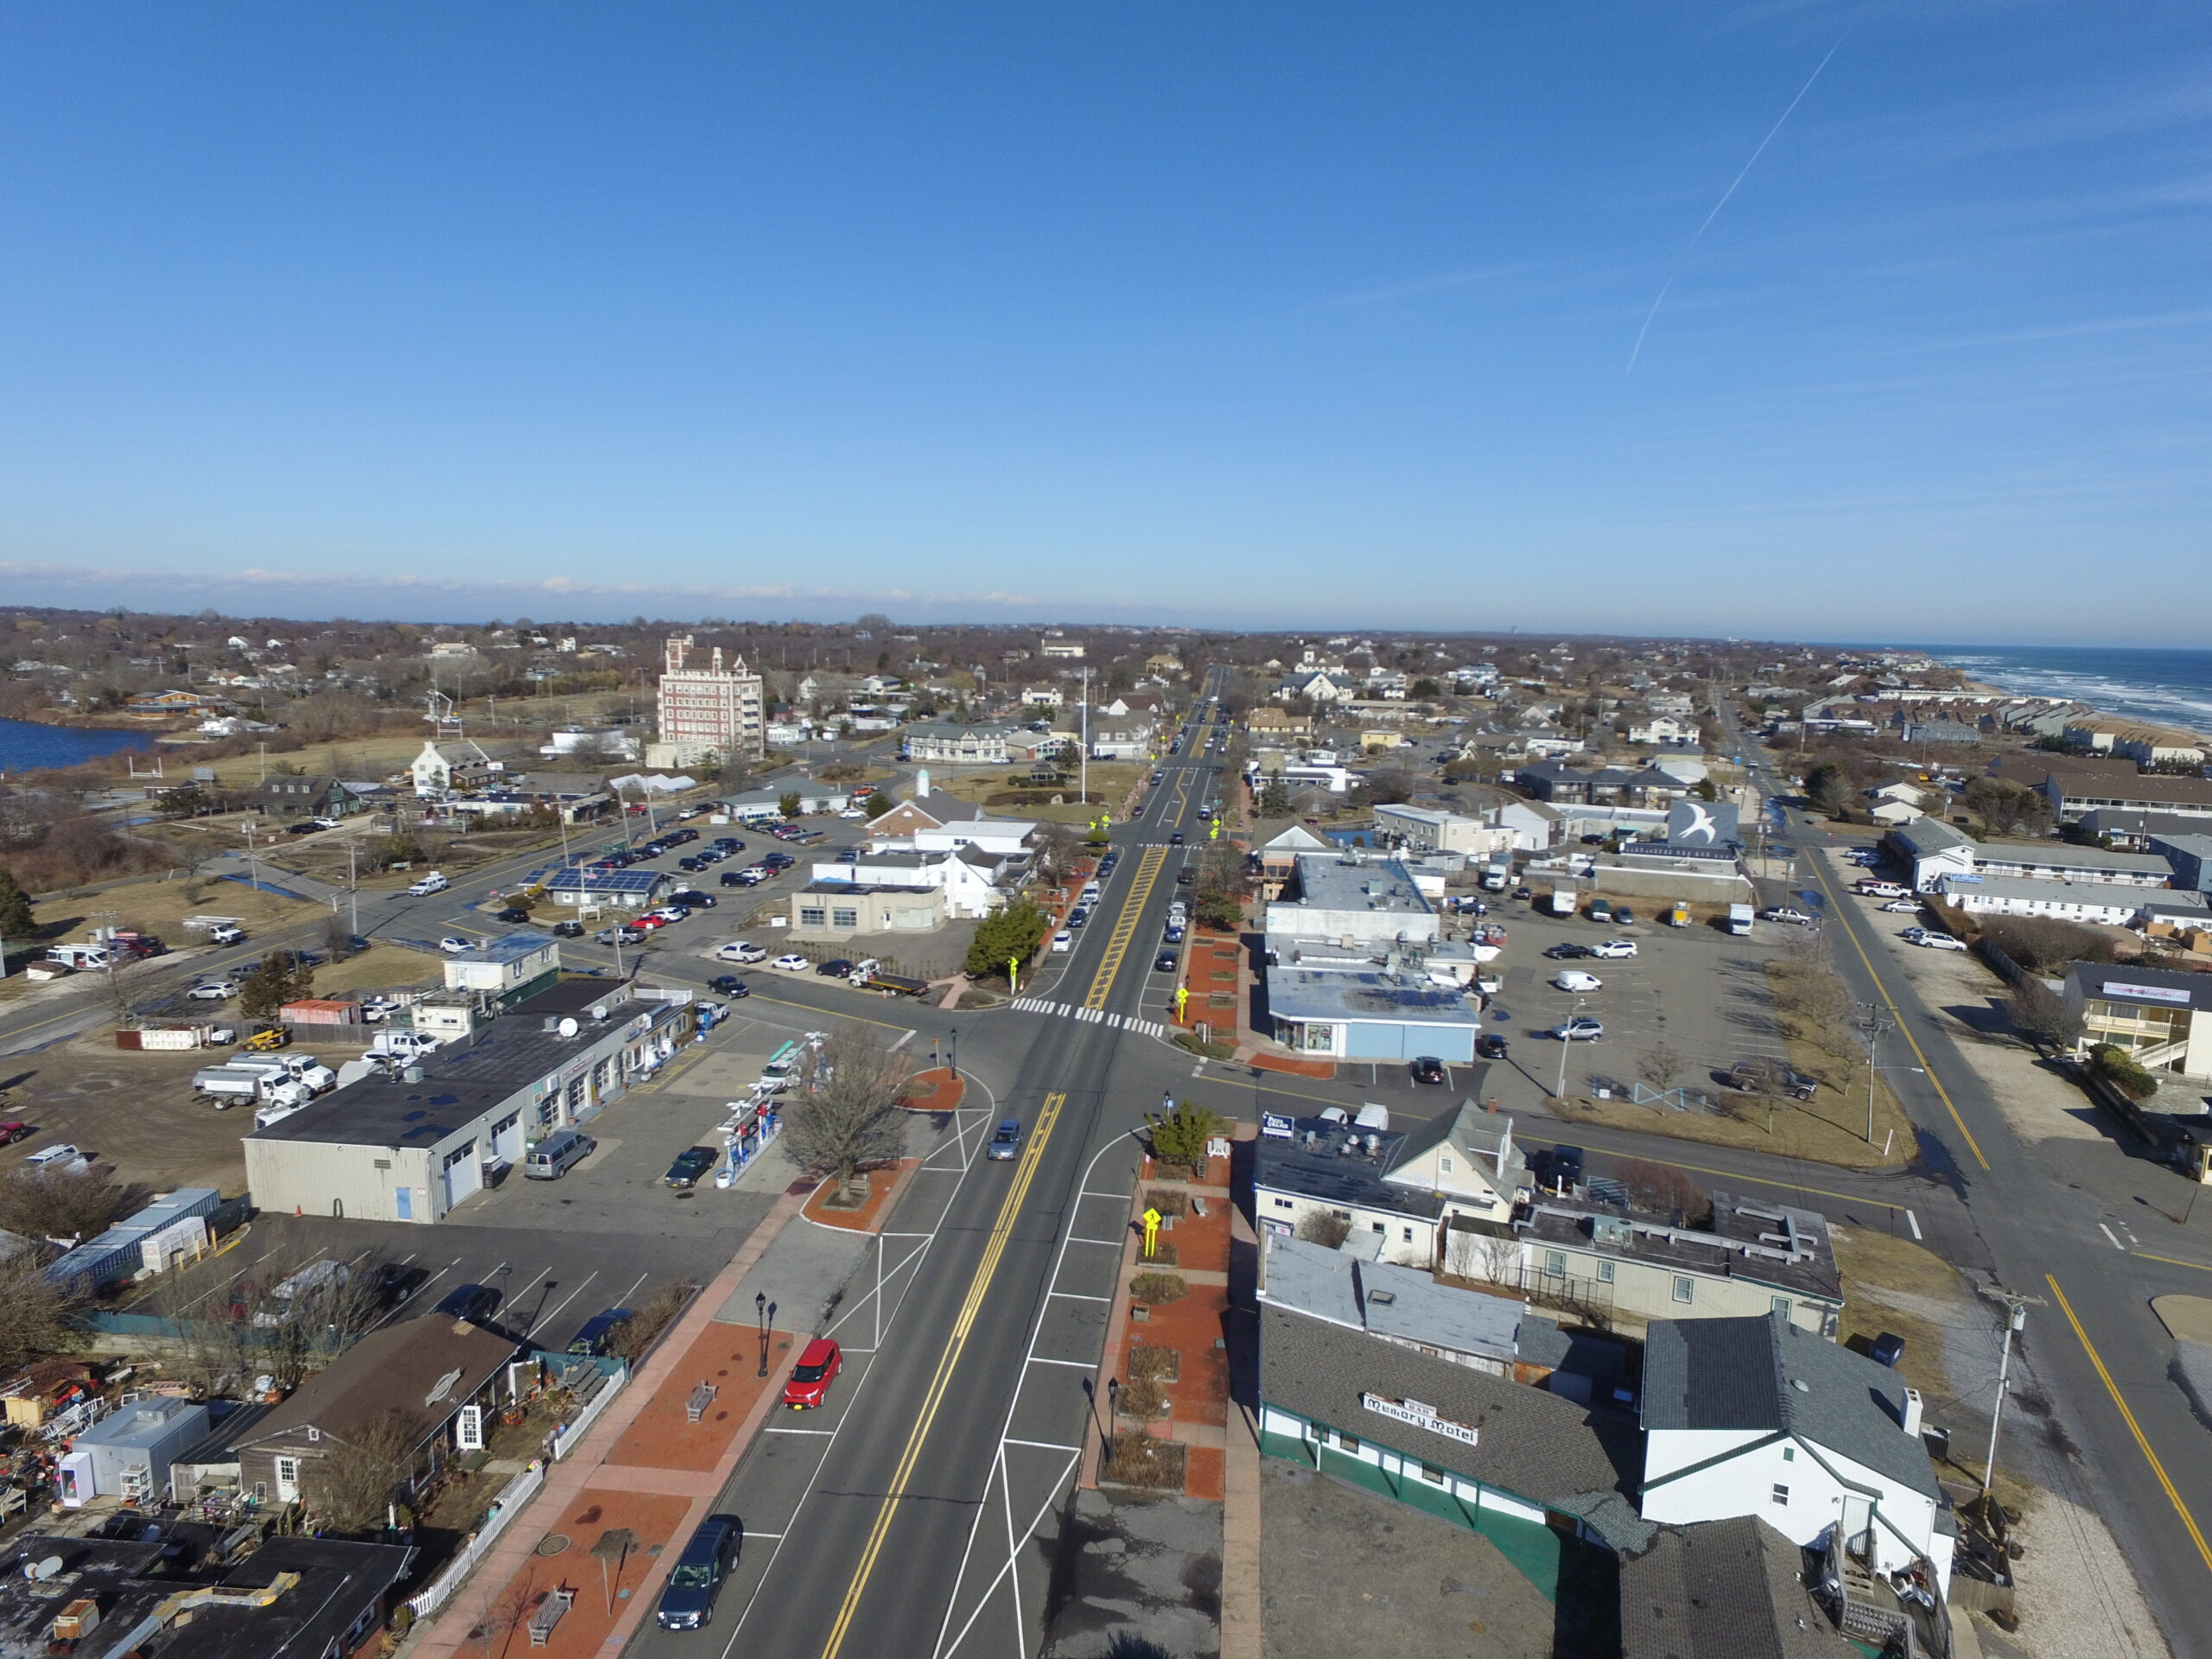 Montauk Highway runs through downtown Montauk, which makes the entire hamlet vulnerable to traffic impacts of more flights into Montauk Airport, some residents claim.